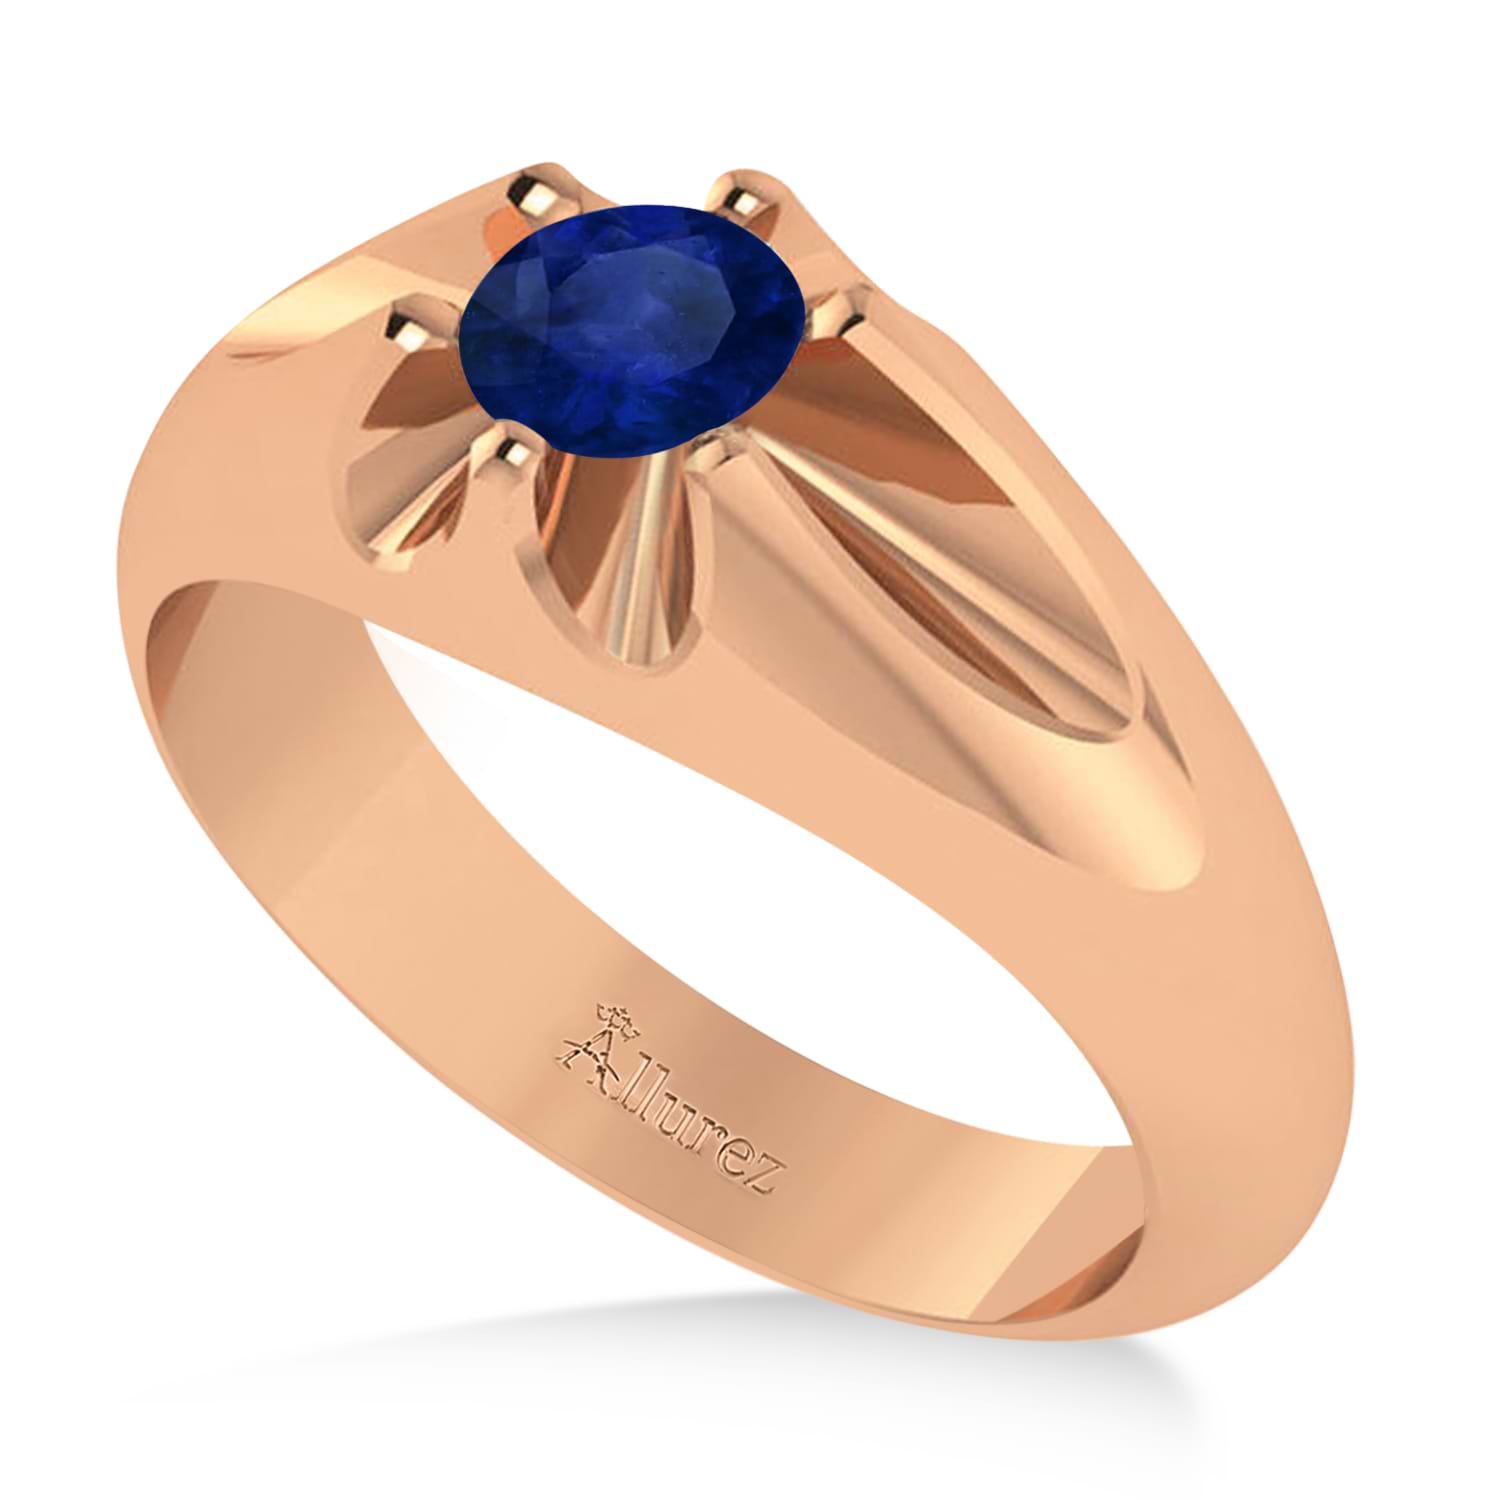 Men's Solitaire Blue Sapphire Ring 14k Rose Gold (0.50ct)